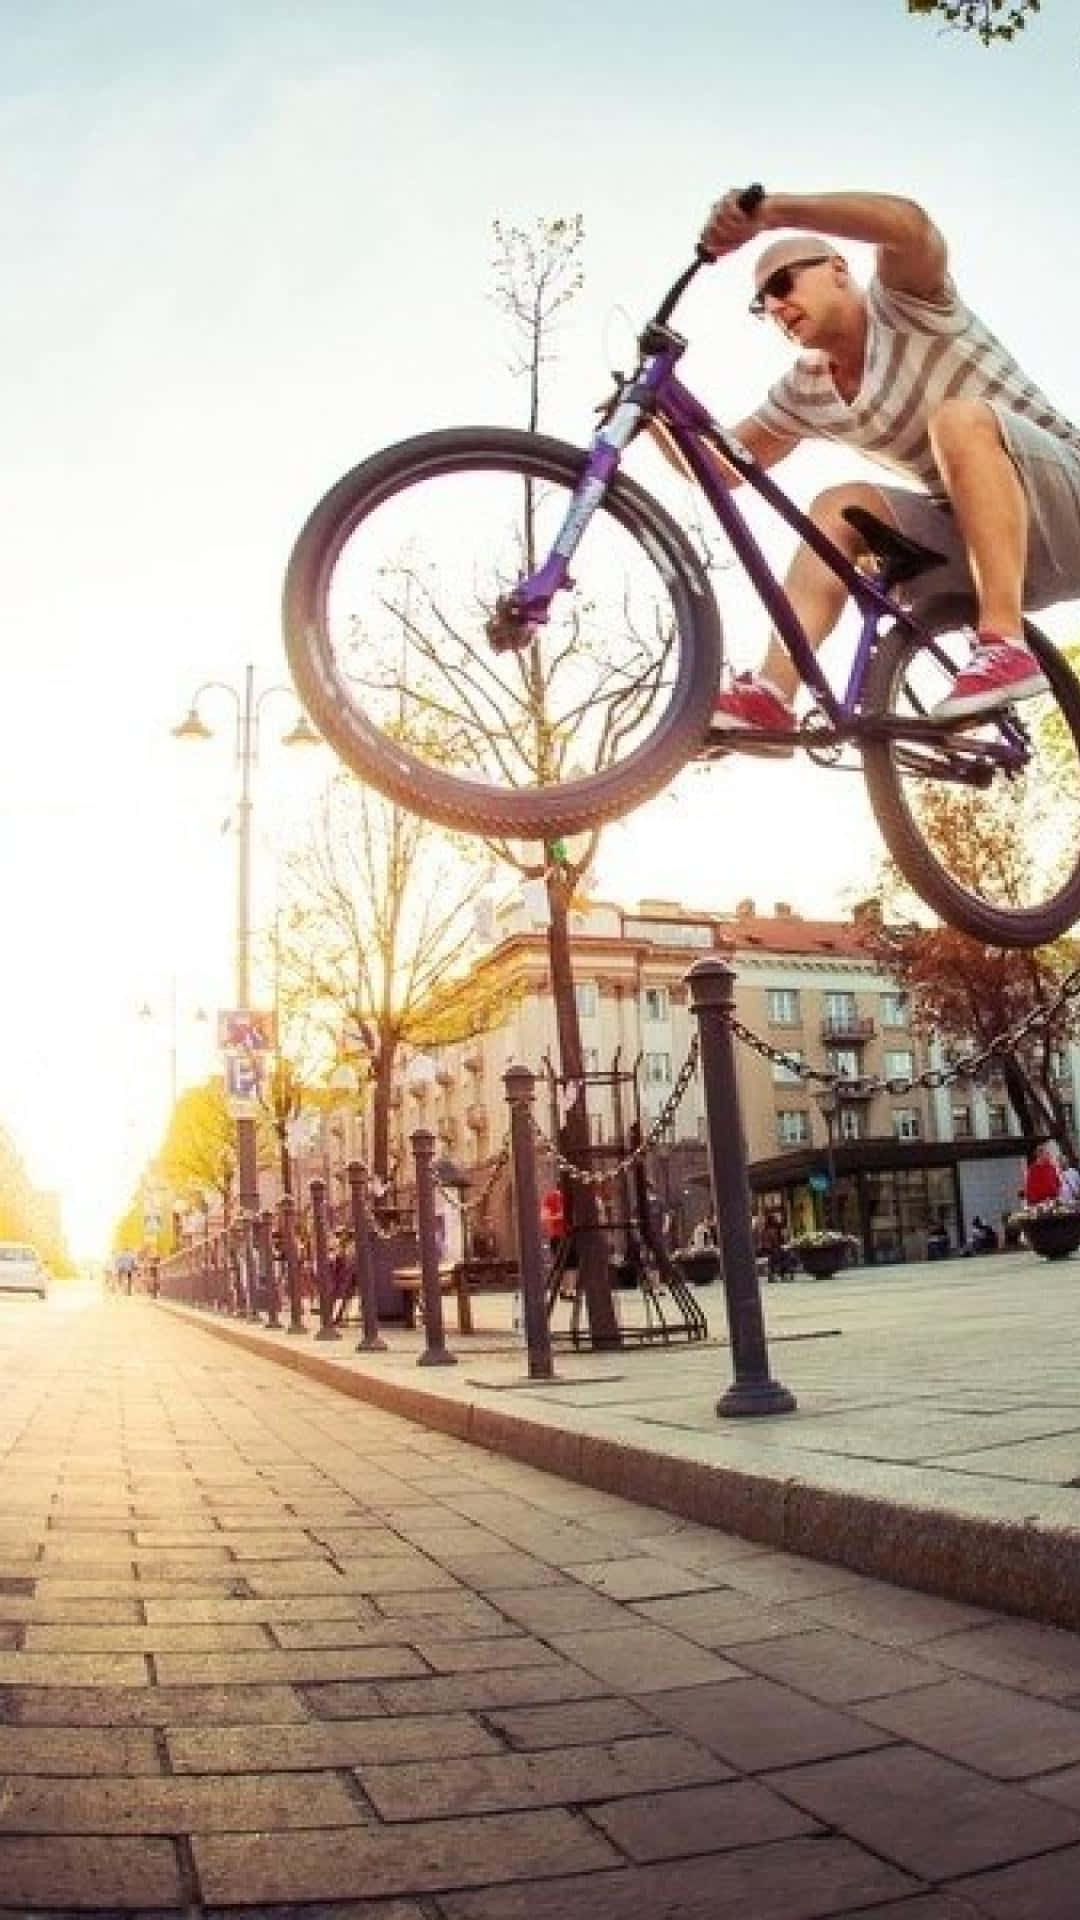 A Man Doing A Bike Trick In The City Wallpaper